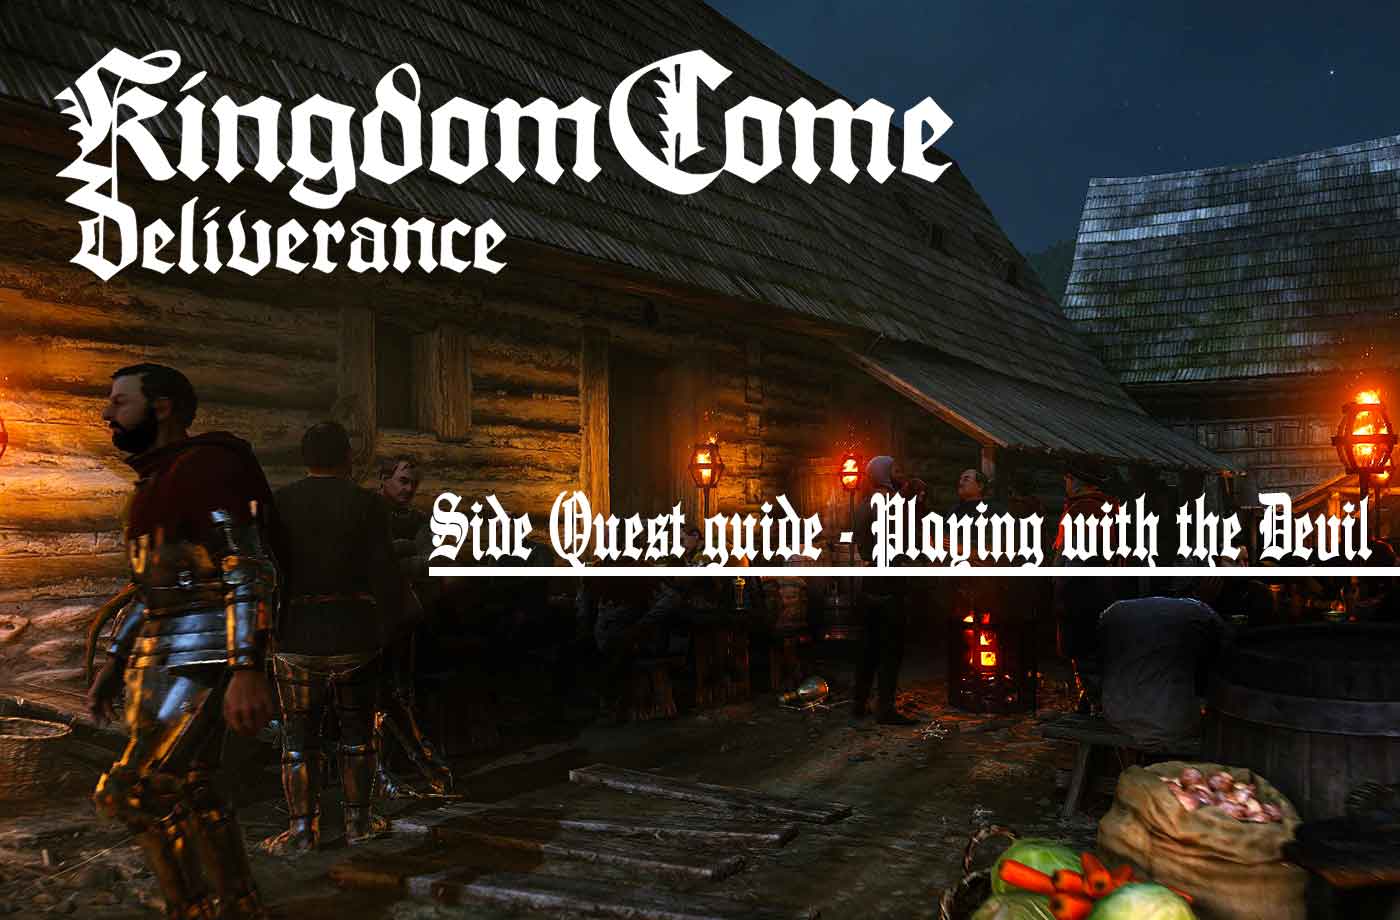 Kingdom come deliverance playing with the devil questions and answers